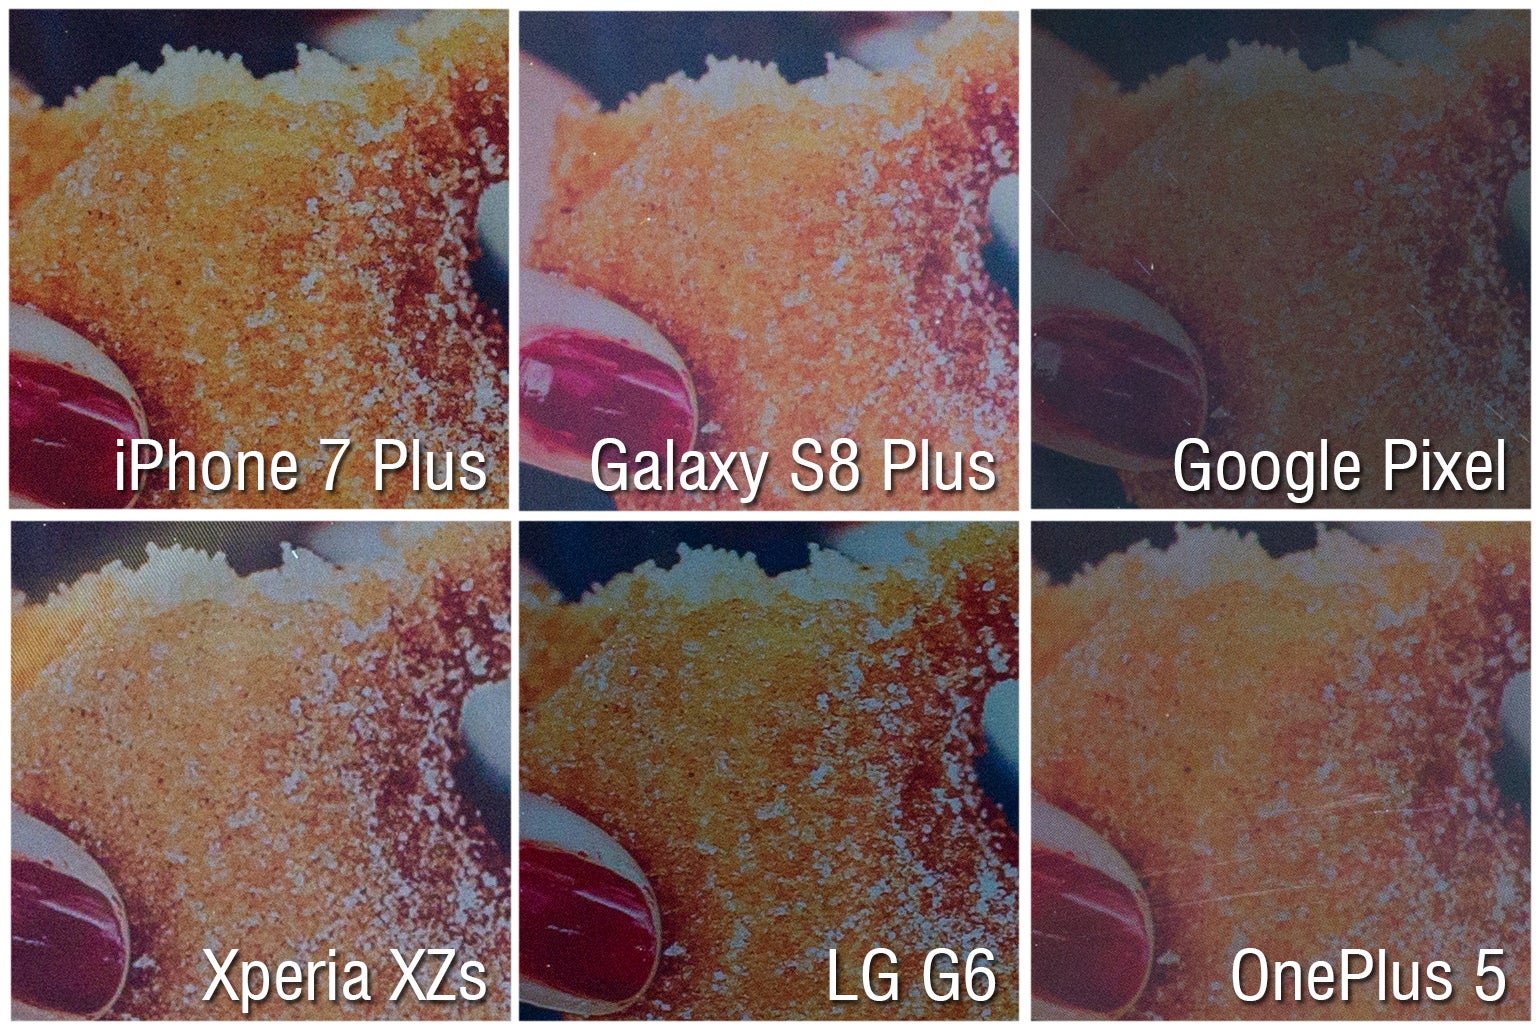 100% crops under direct sunlight - Display brightness and outdoor visibility comparison: Samsung Galaxy S8 vs iPhone 7 vs LG G6 vs Google Pixel vs Sony Xperia XZs